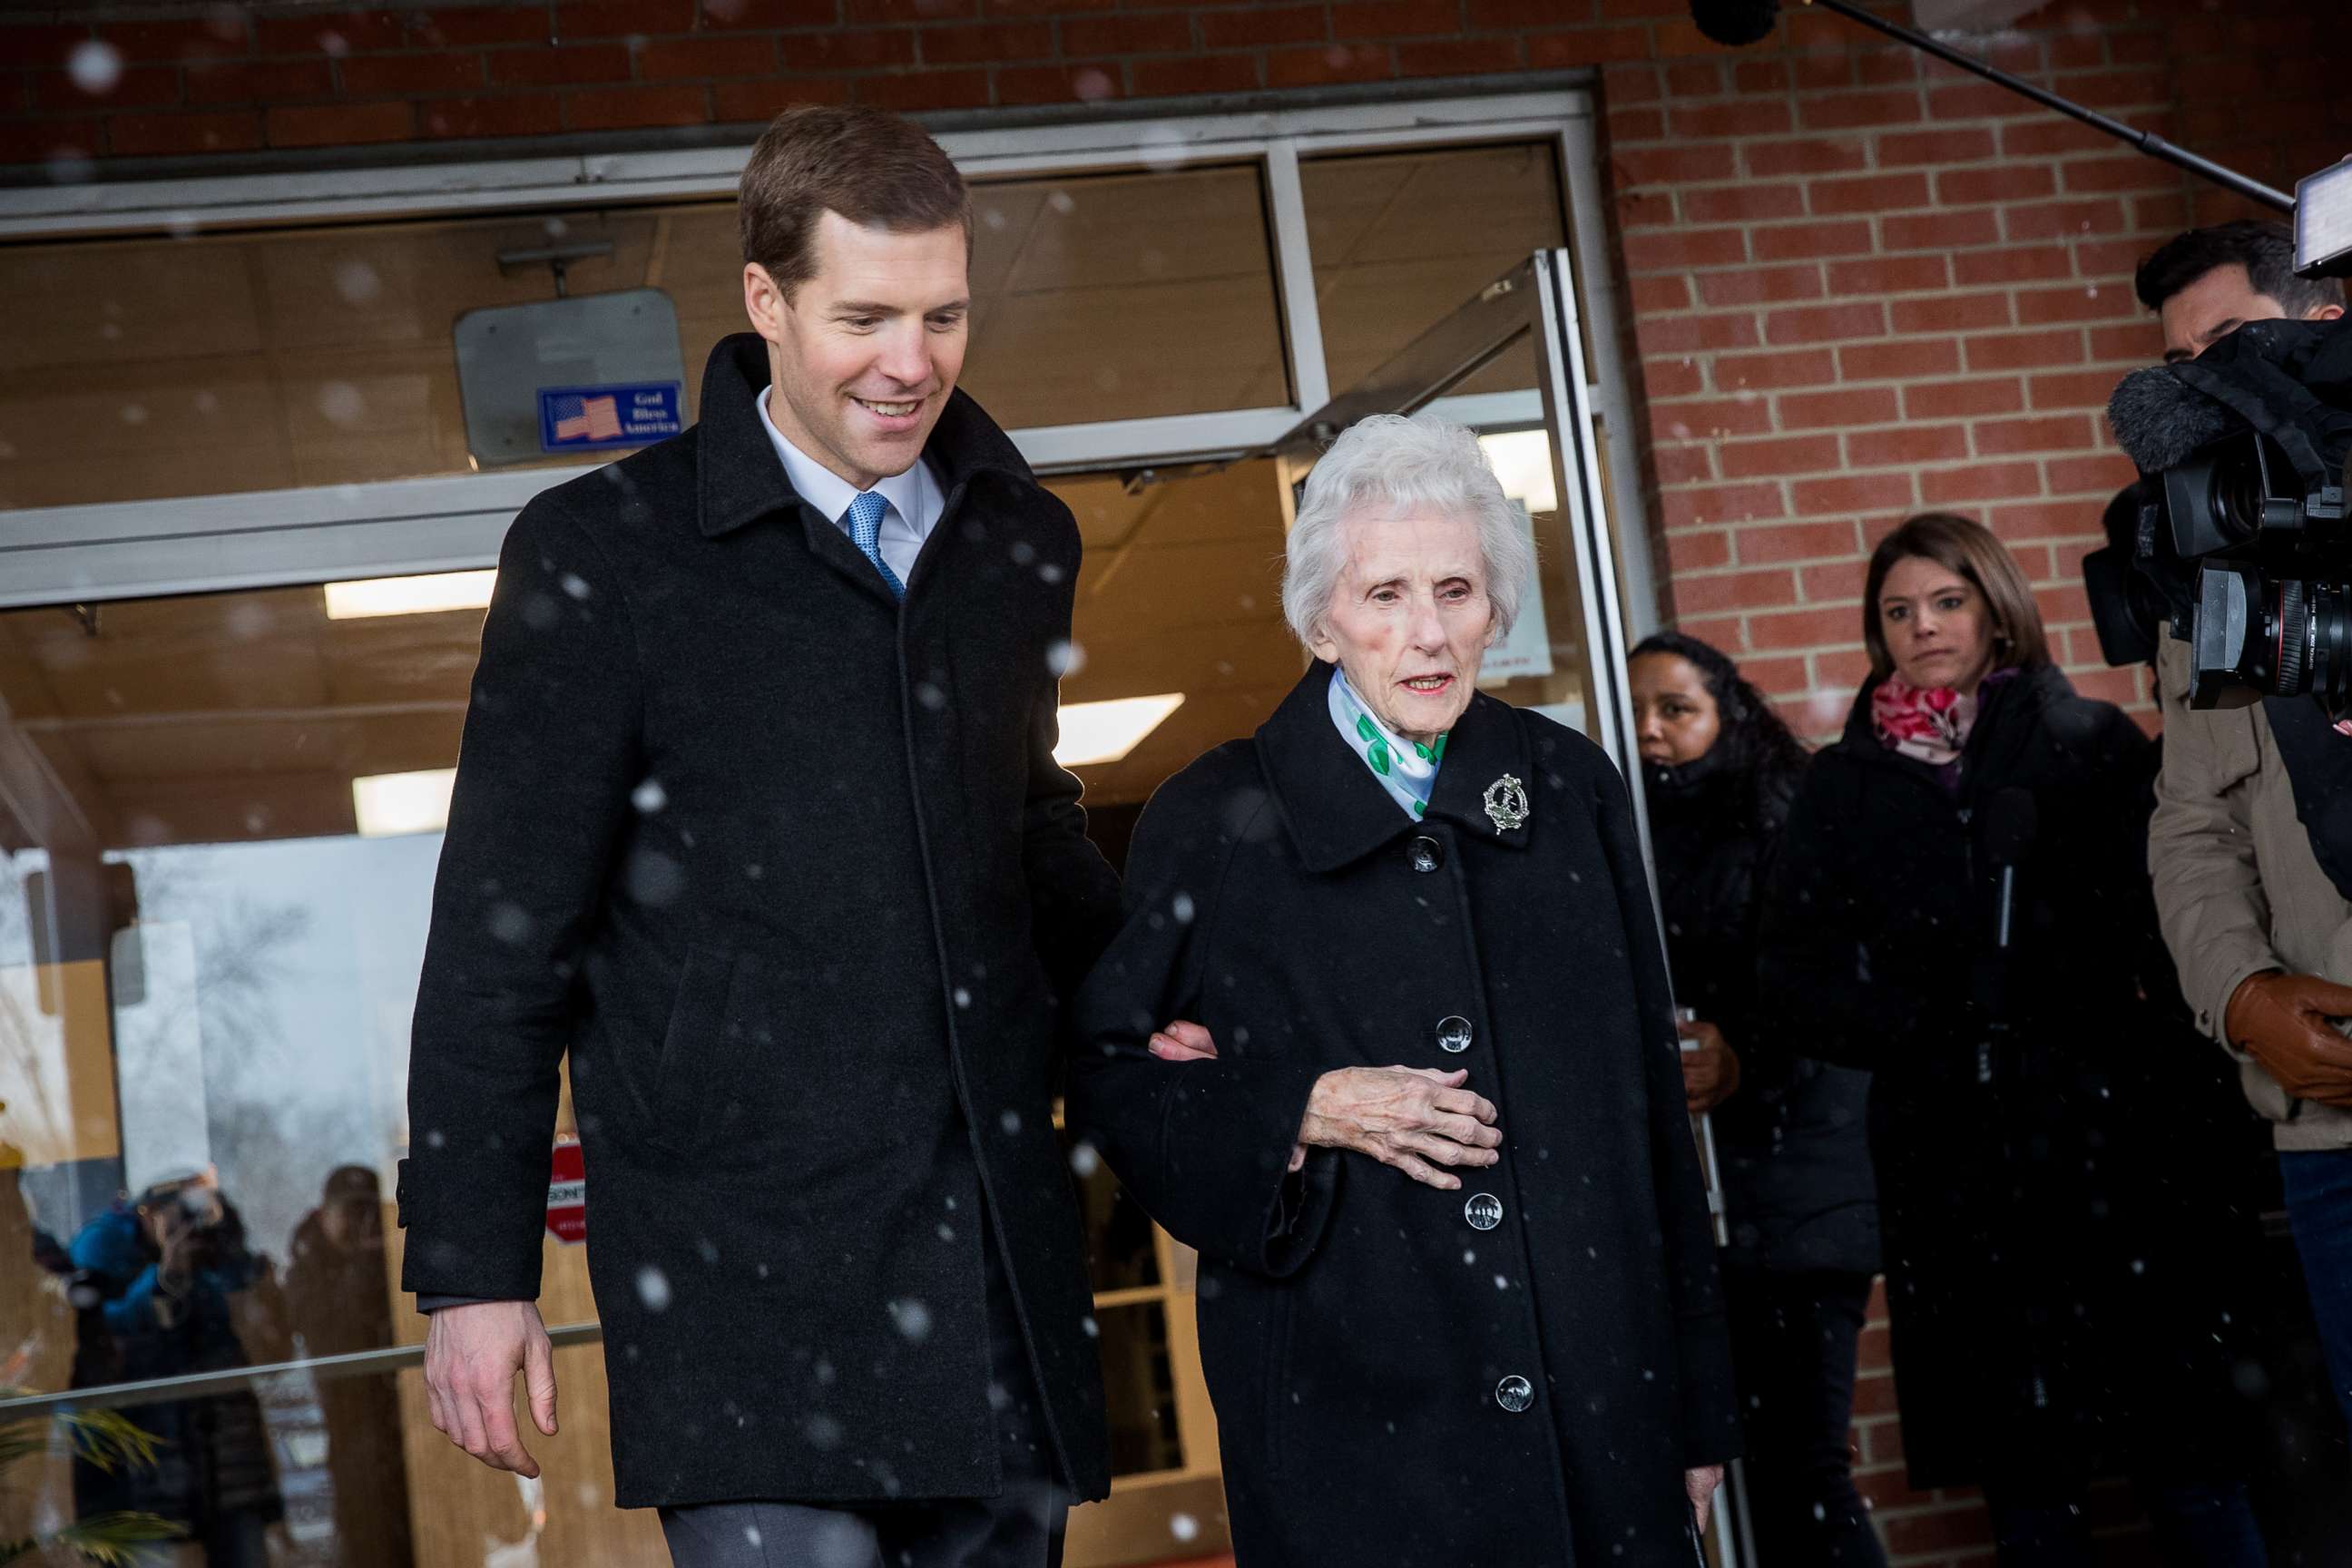 PHOTO: Conor Lamb, Democratic congressional candidate for Pennsylvania's 18th district, and his grandmother Barbara Lamb exit the polling station after she voted at Our Lady of Victory Church, March 13, 2018 in Carnegie, Pennsylvania.